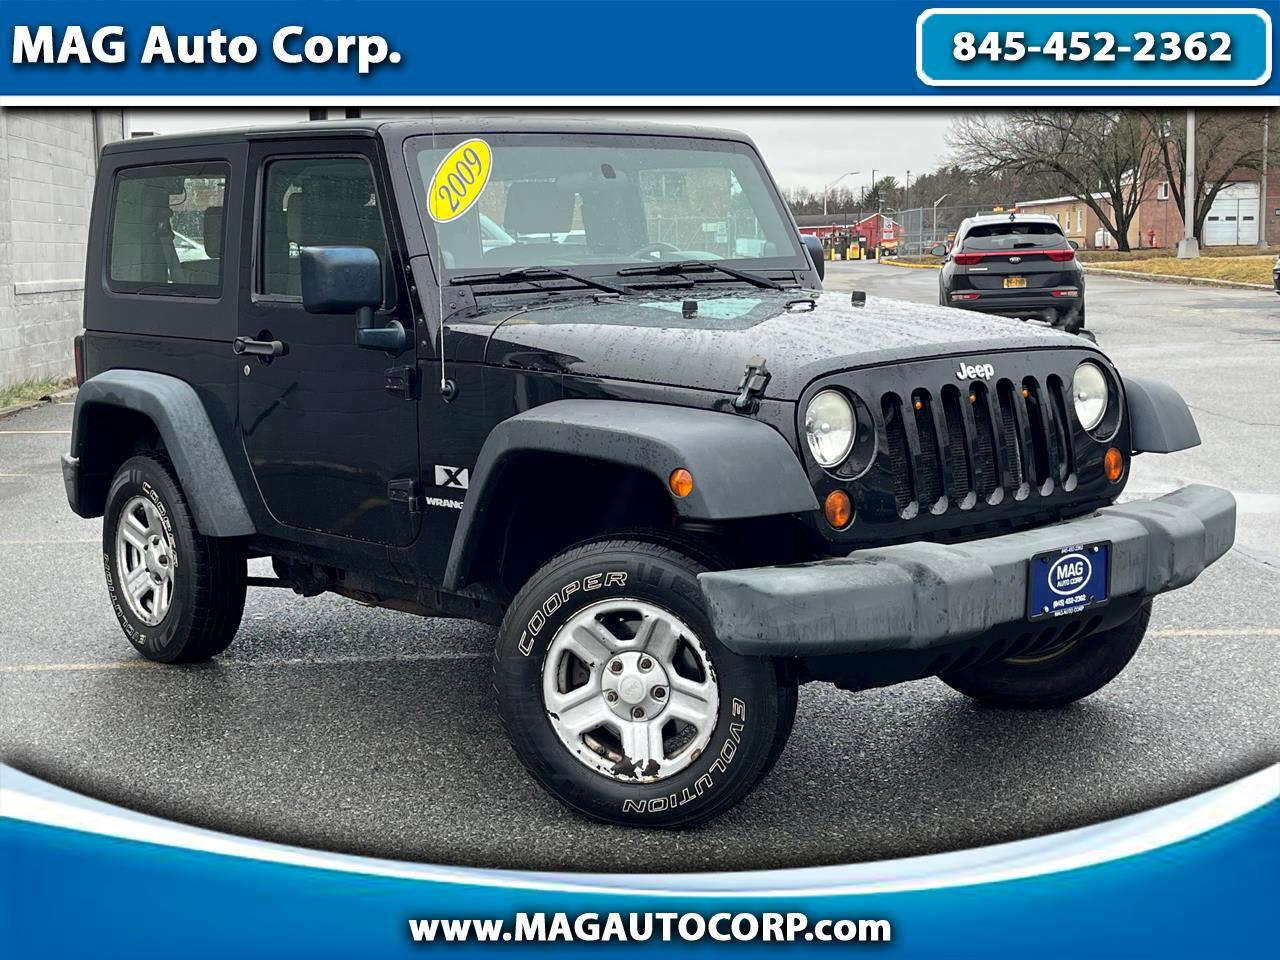 Used 2009 Jeep Wrangler X for Sale in Poughkeepsie NY 12603 MAG Auto Corp.